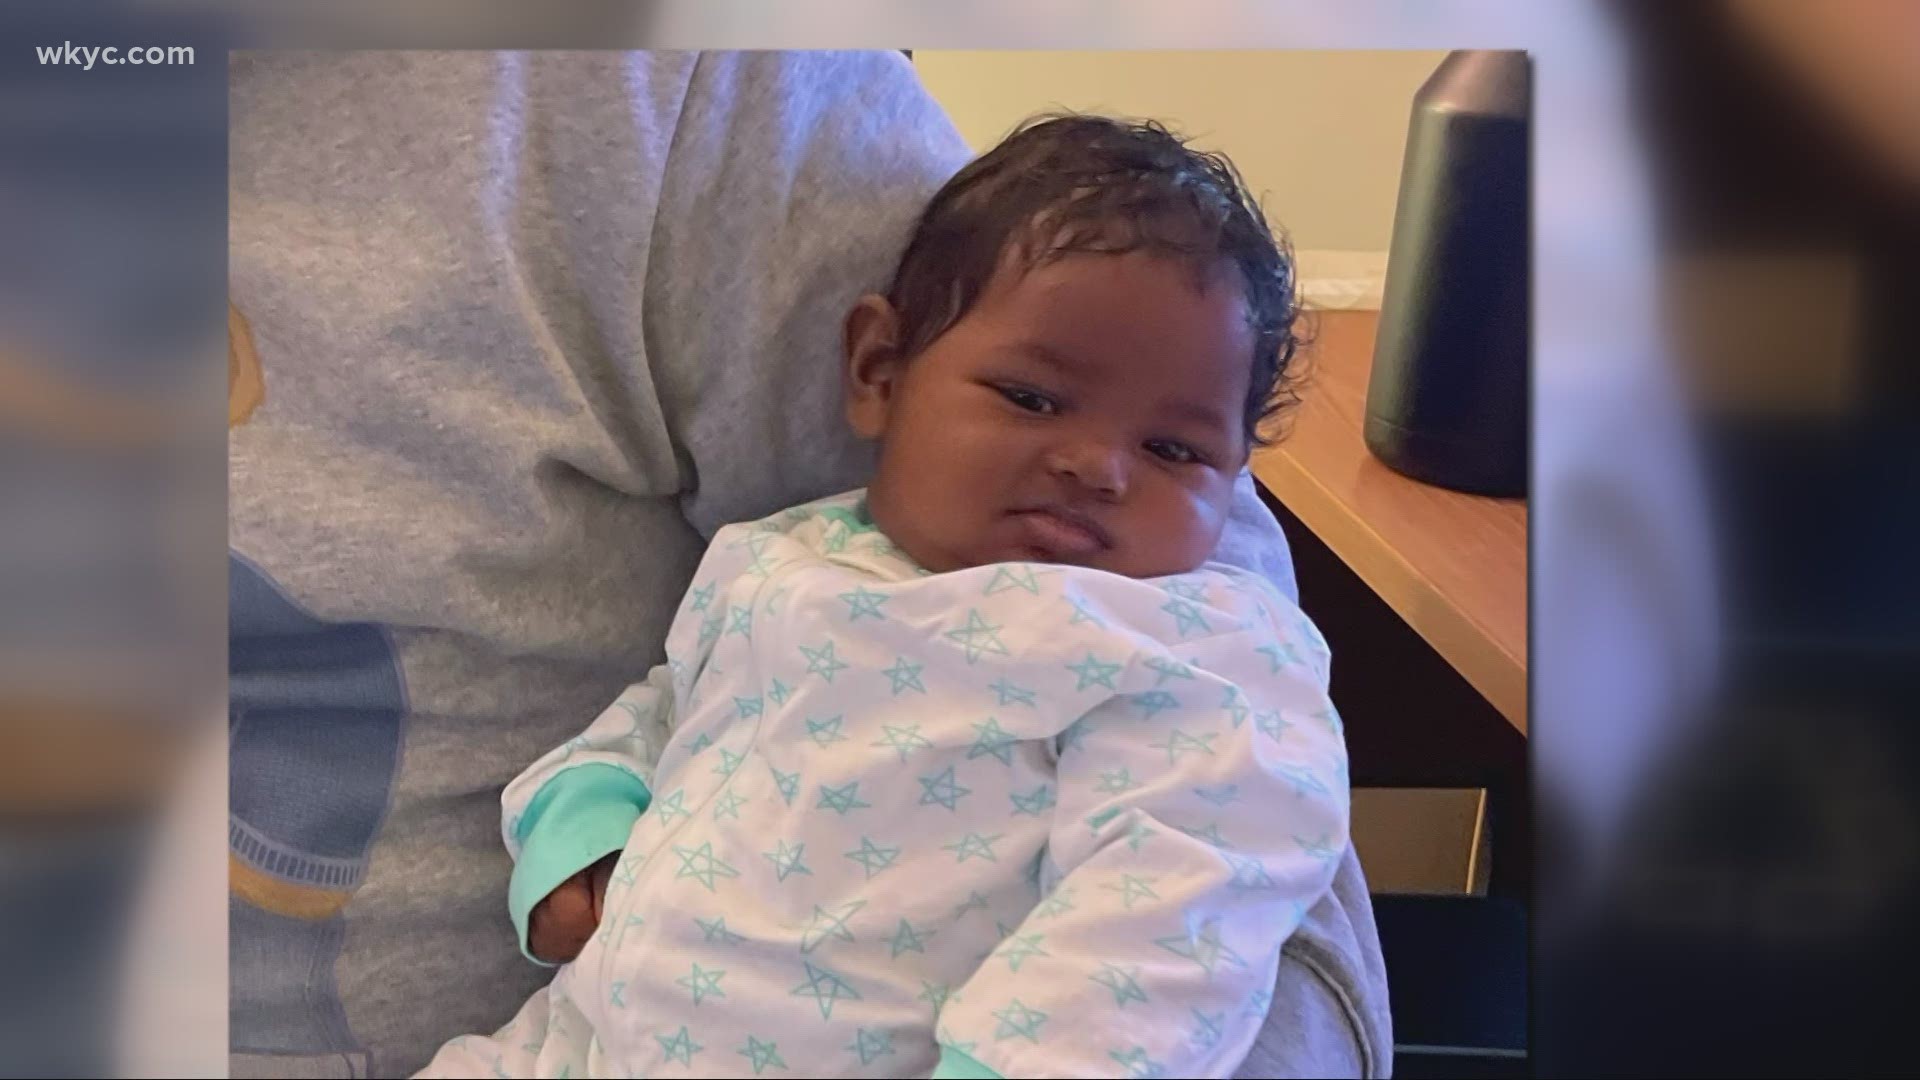 This six-month-old girl was turned over at an RTA bus stop Saturday night. now police need your help identifying her, and finding her family.
January Keaton reports.